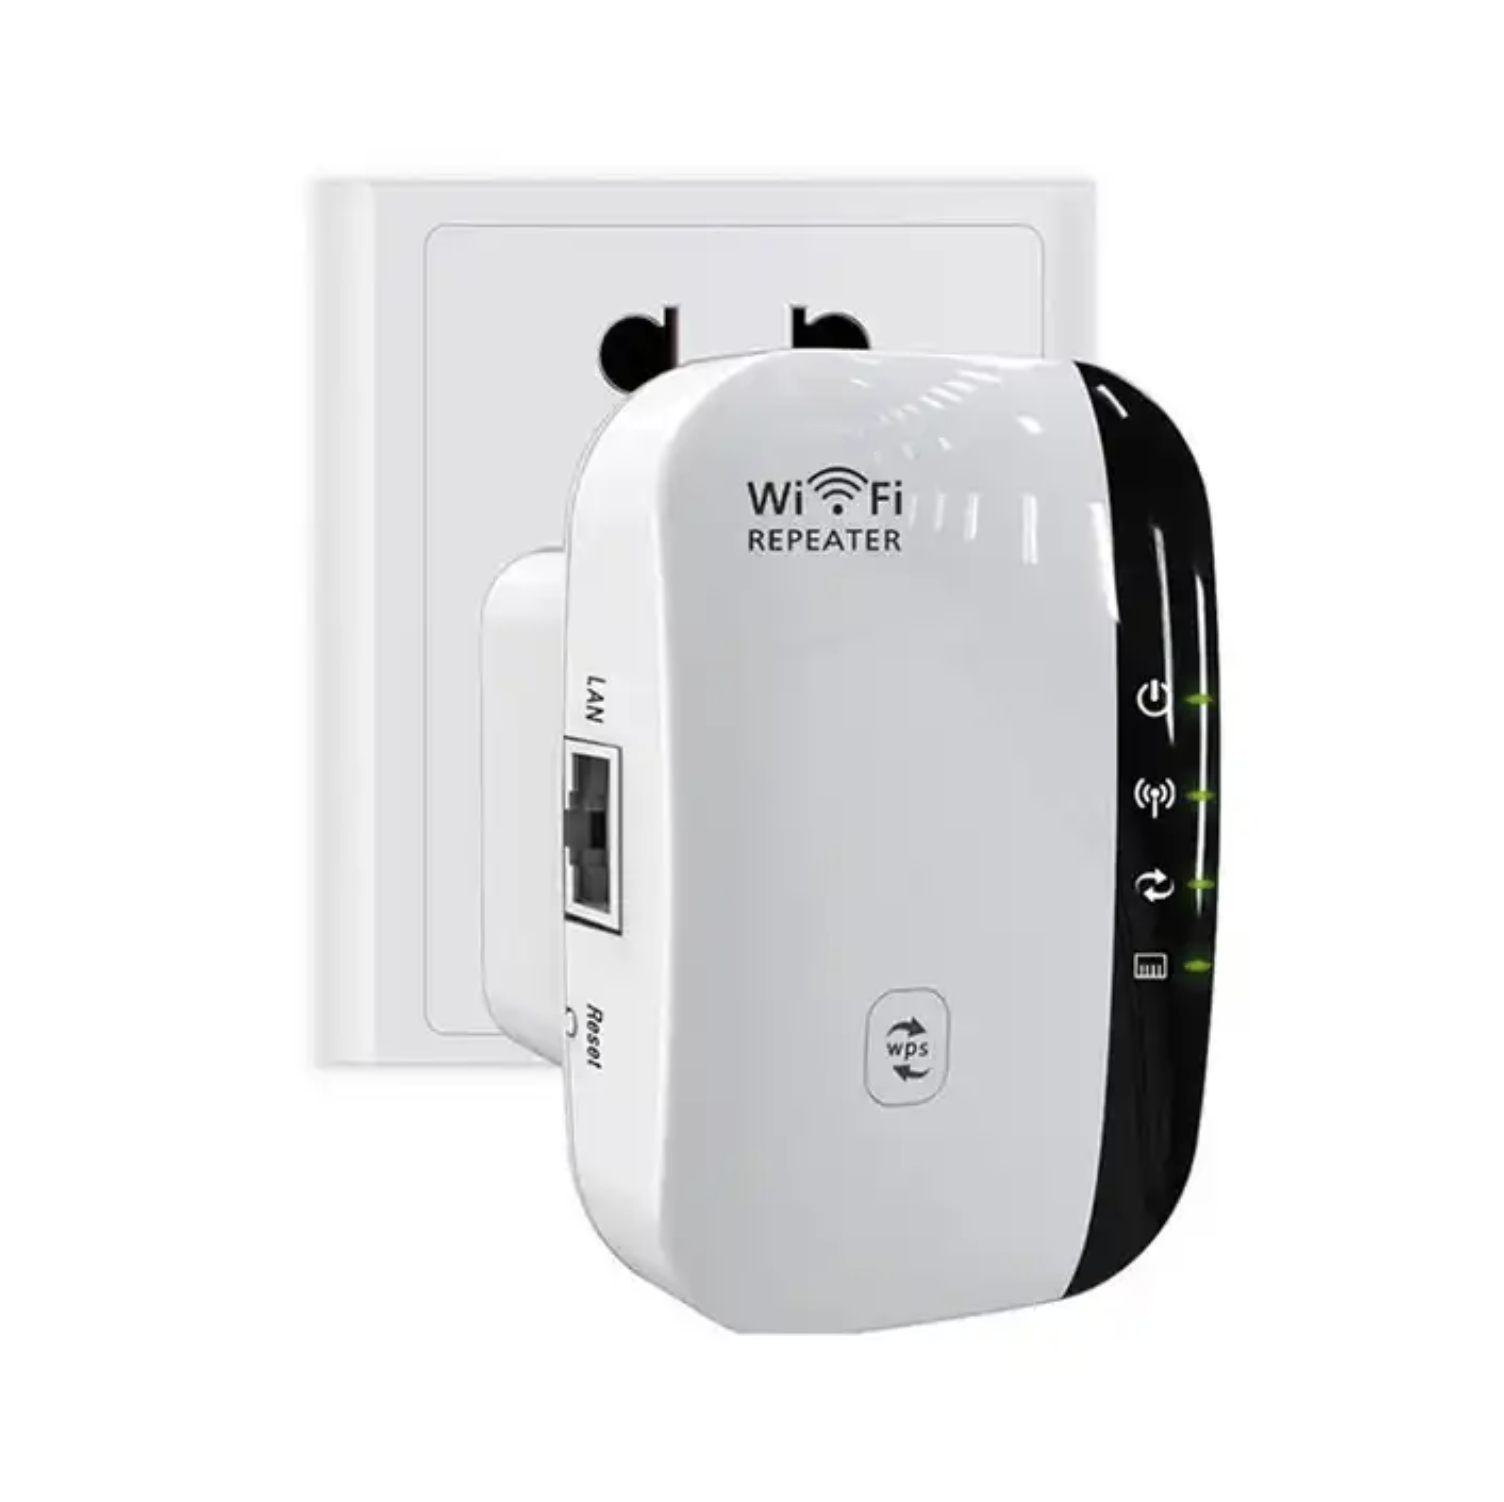 2.4 Ghz Wireless Modem Wi Fi Repeater 300 Mbps Router